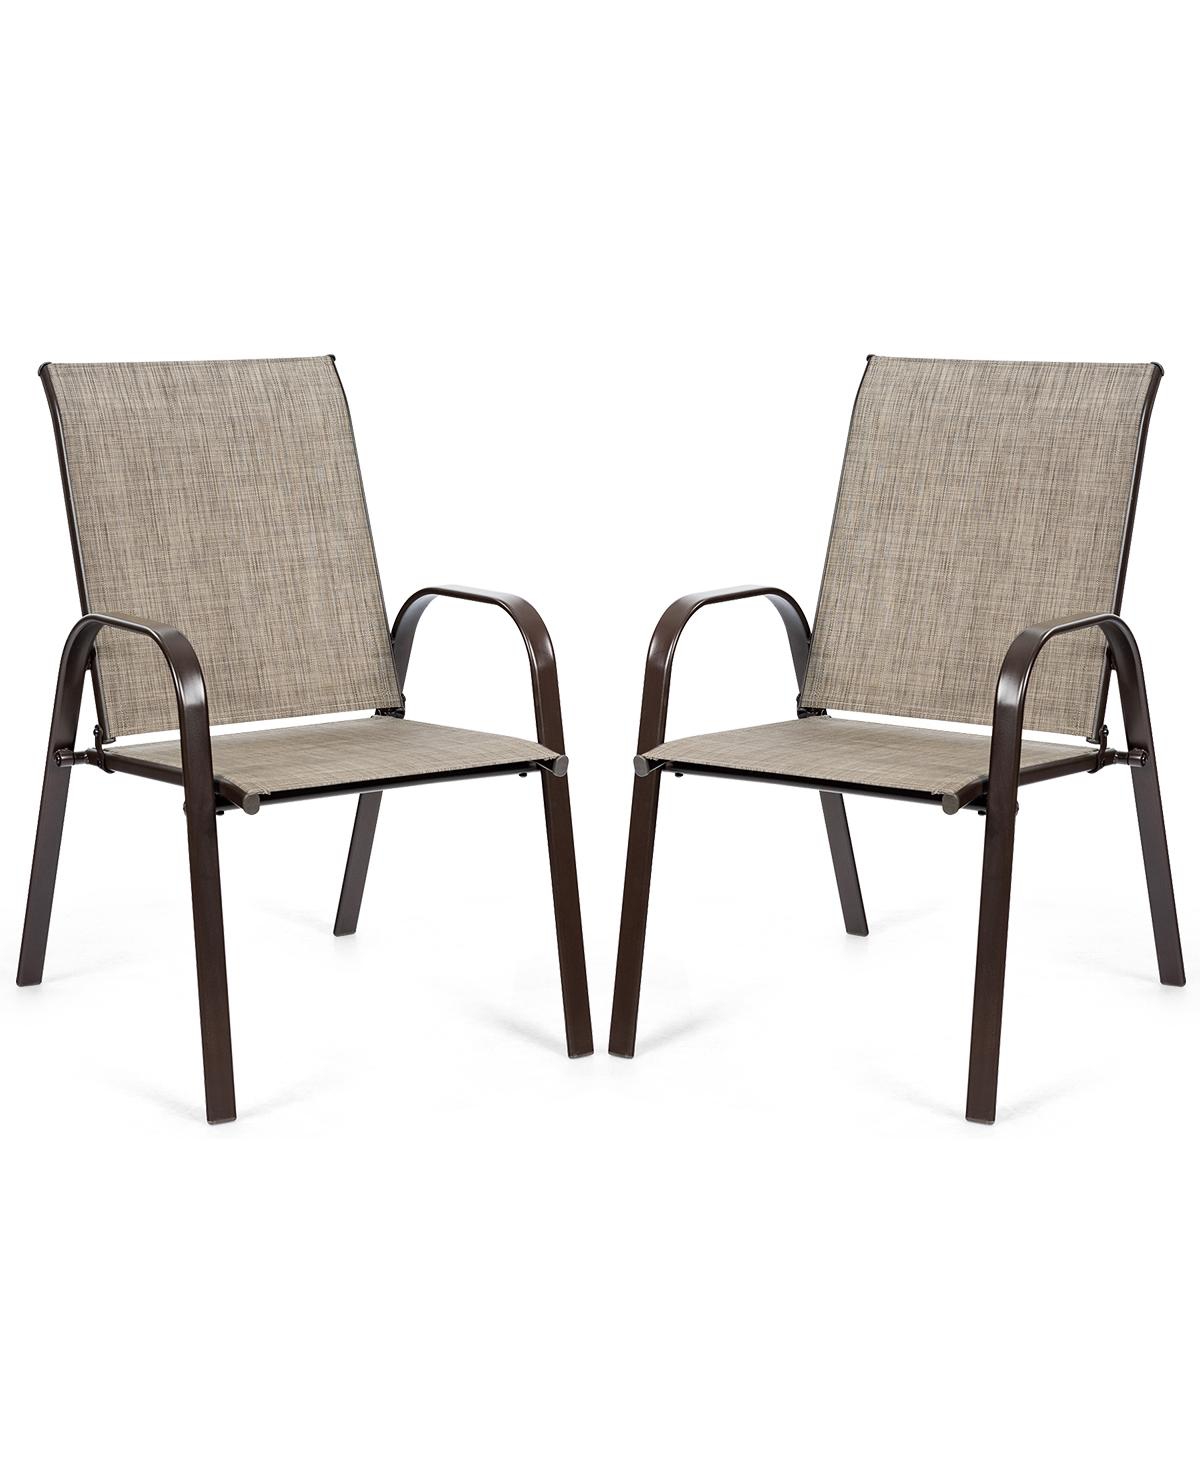 Costway 2pcs Patio Chairs Dining Chair Deck Yard W/armrest In Grey